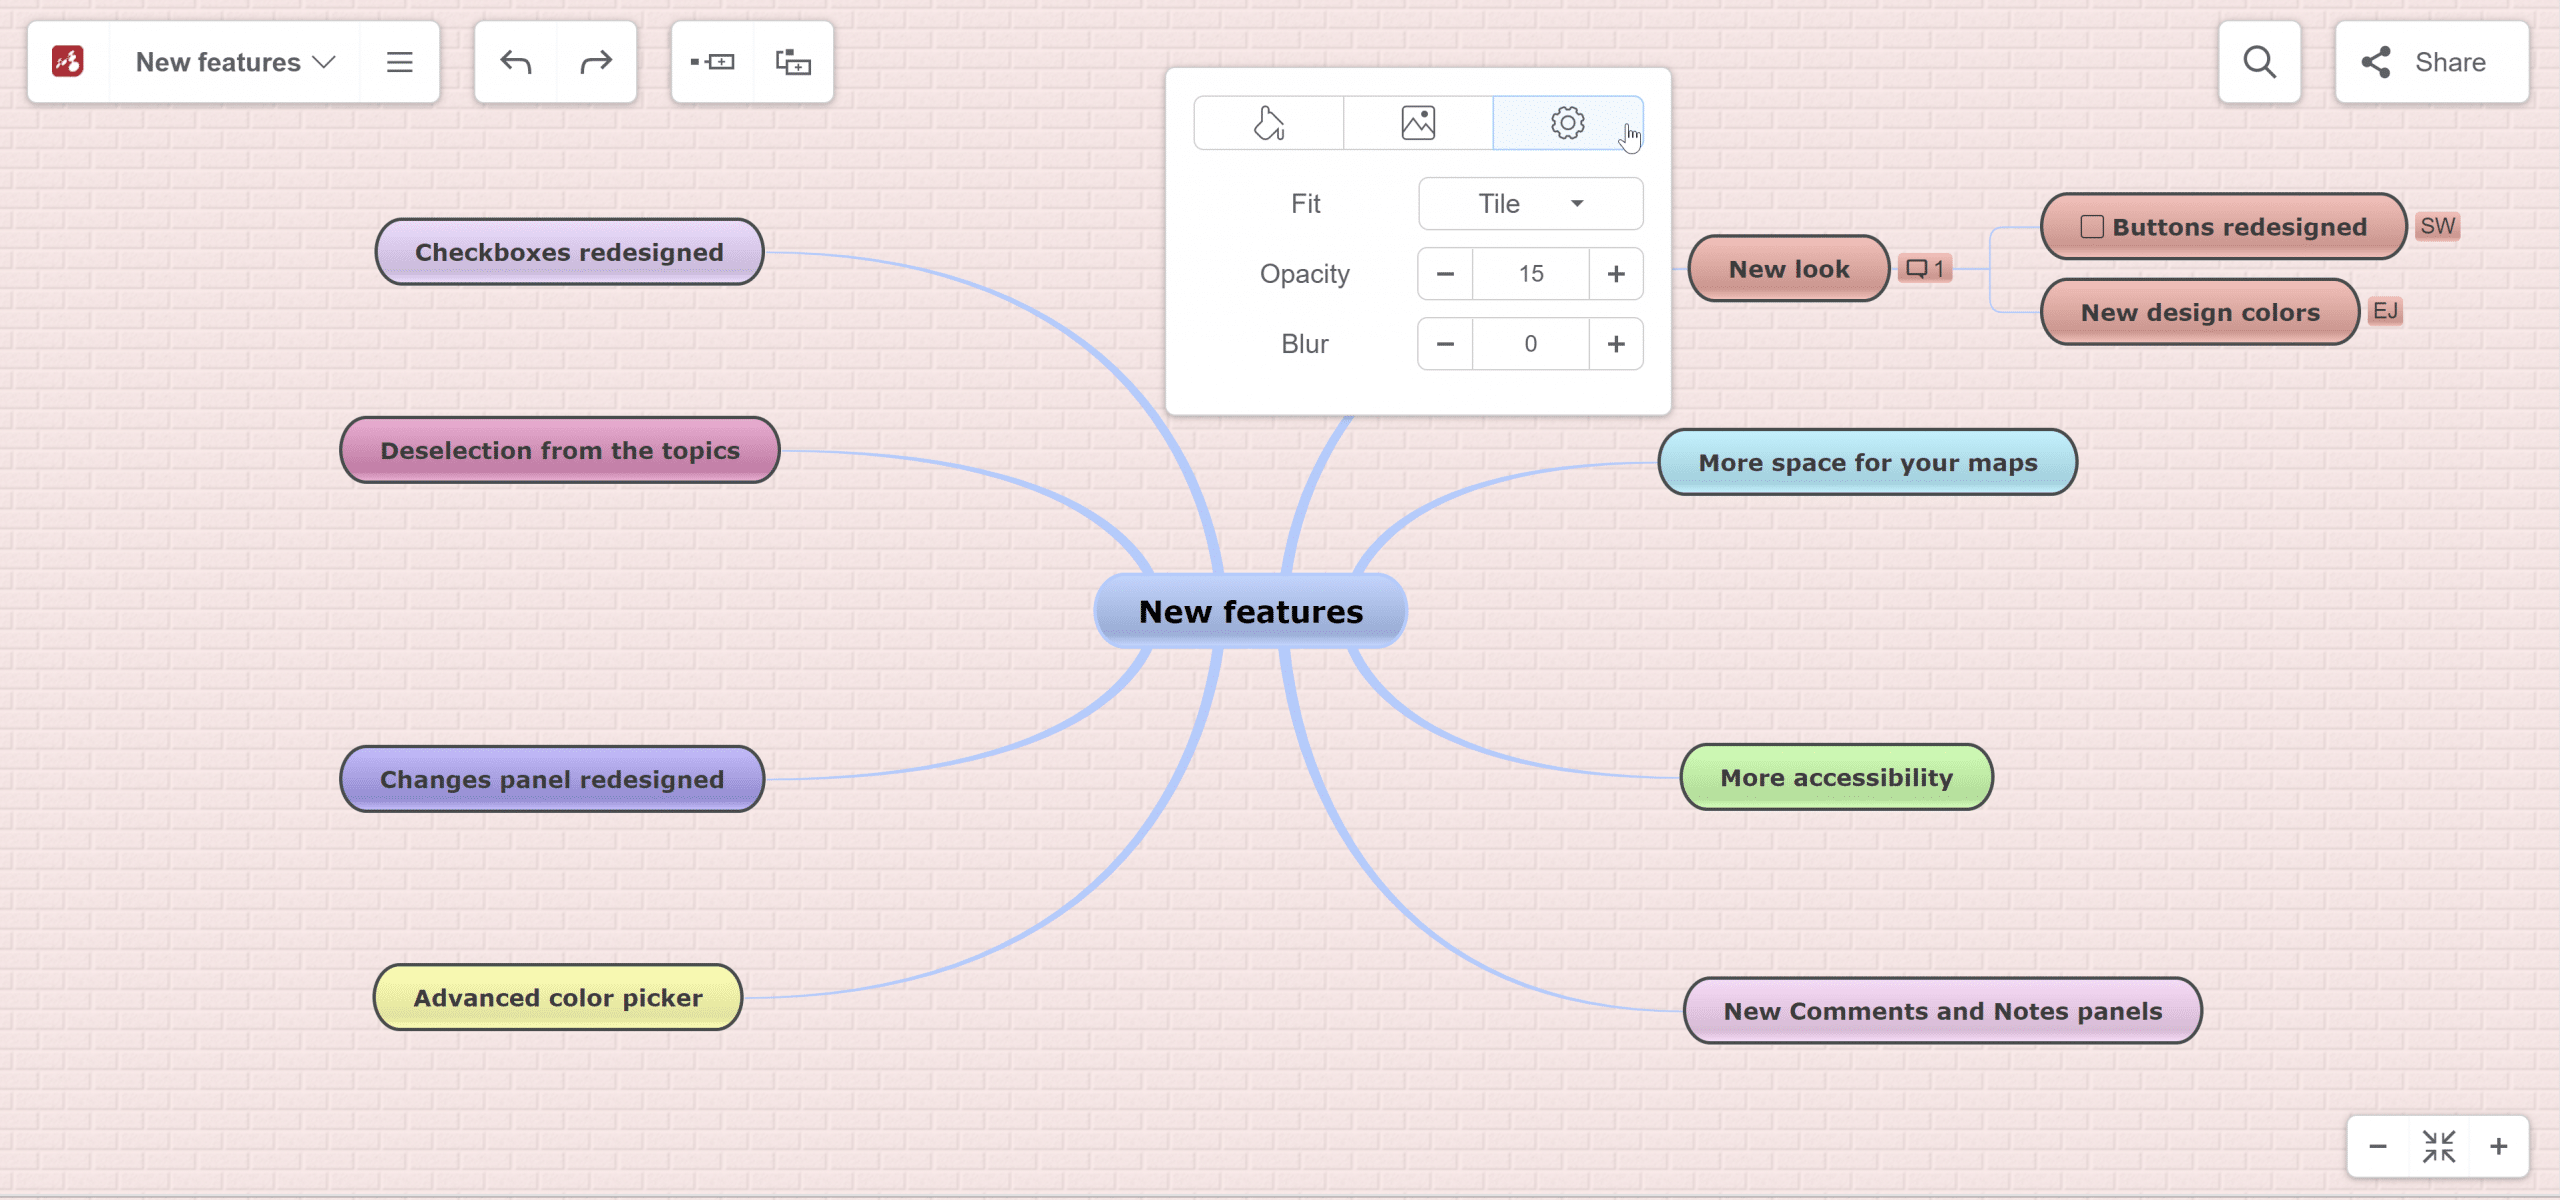 background settings: fit, opacity and blur for the mind map background